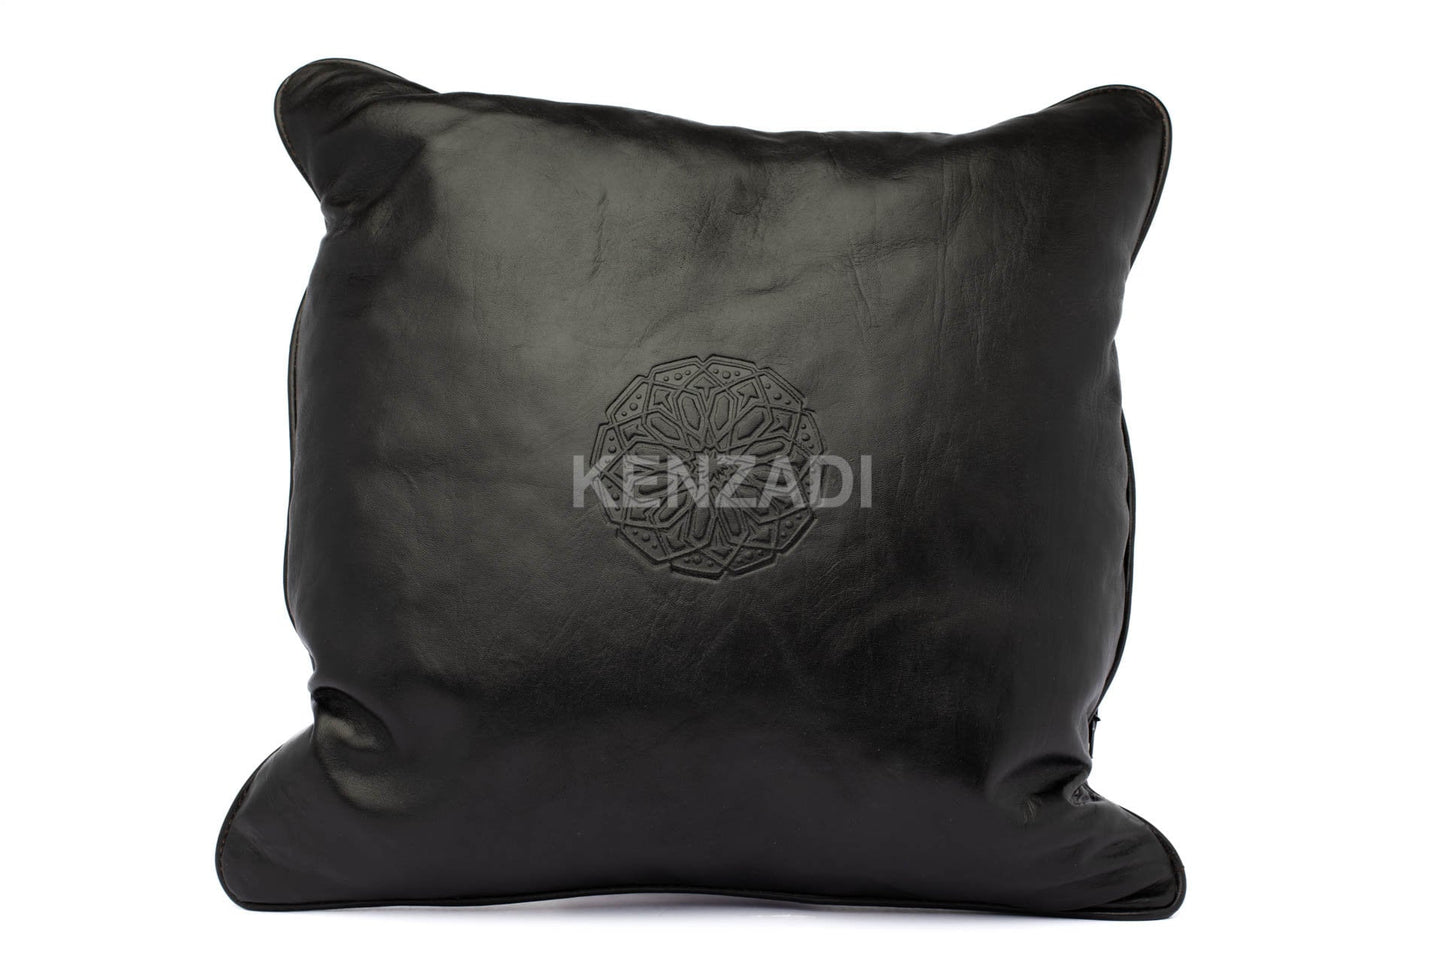 Moroccan Leather Pillow, Black traditional Throw Pillow Case by Kenzadi - Handmade by My Poufs